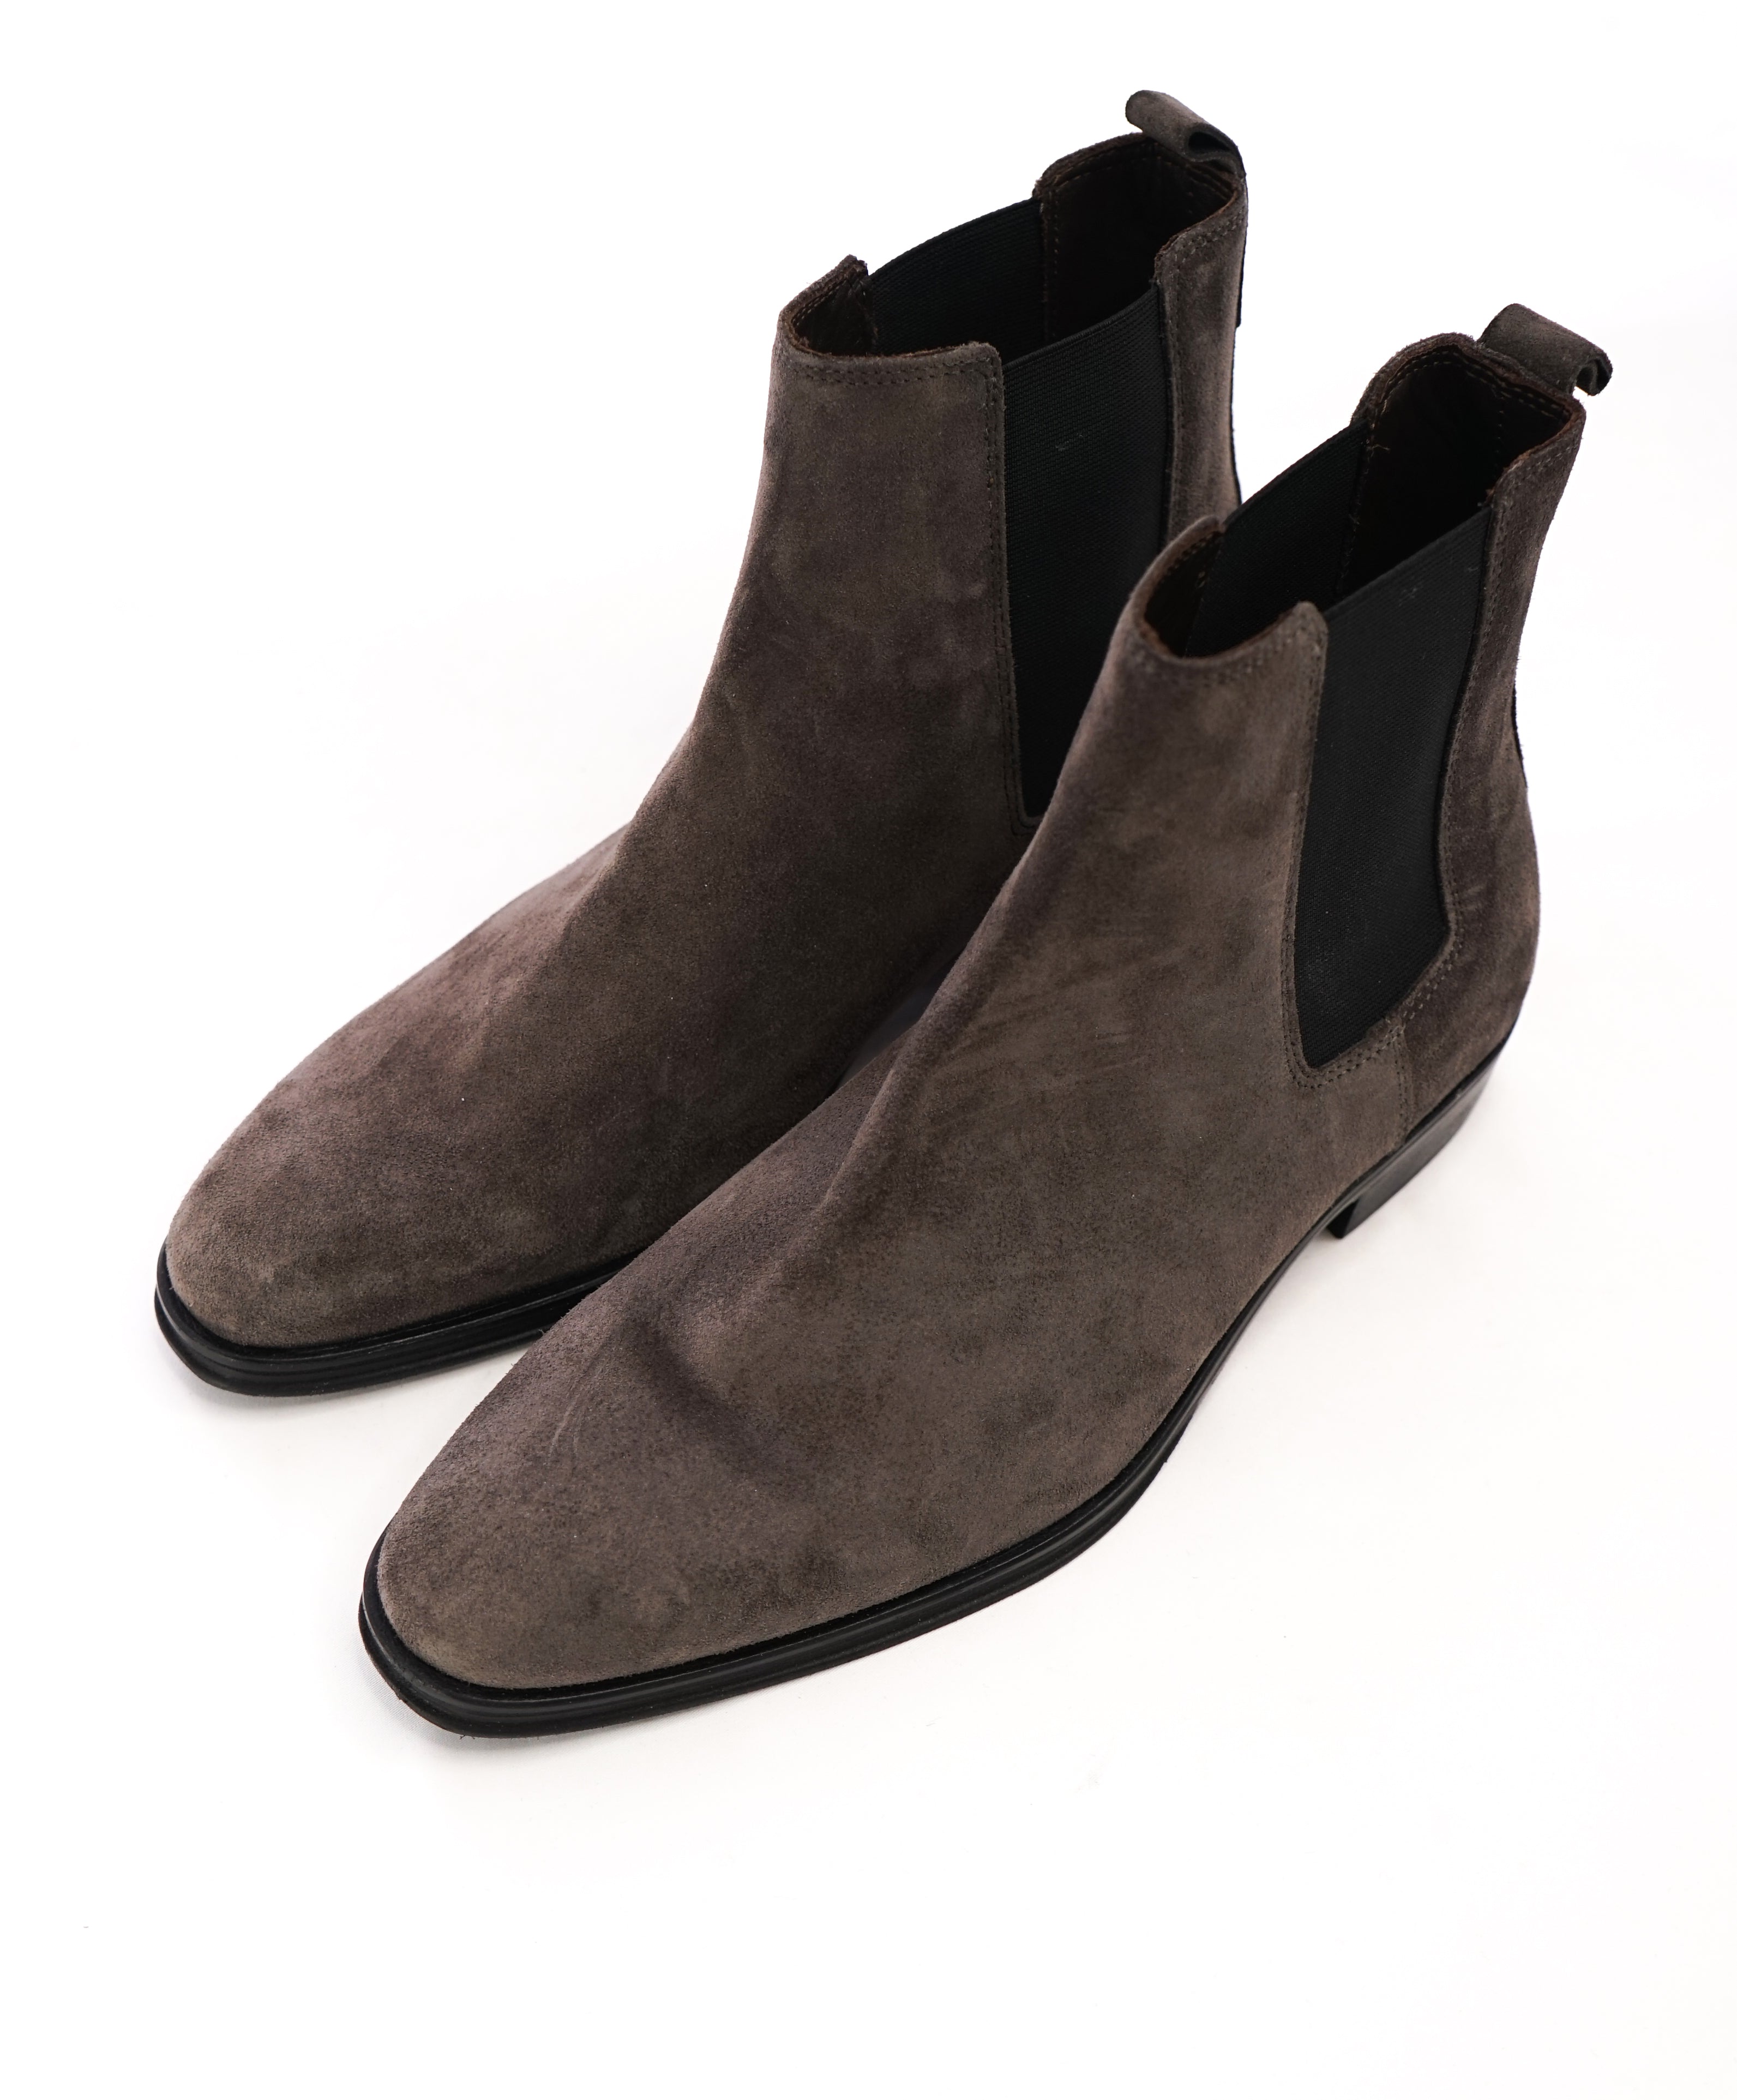 BRUNO MAGLI - Suede Durable Sole Gray Ankle Boots - 8 – Luxe Hanger